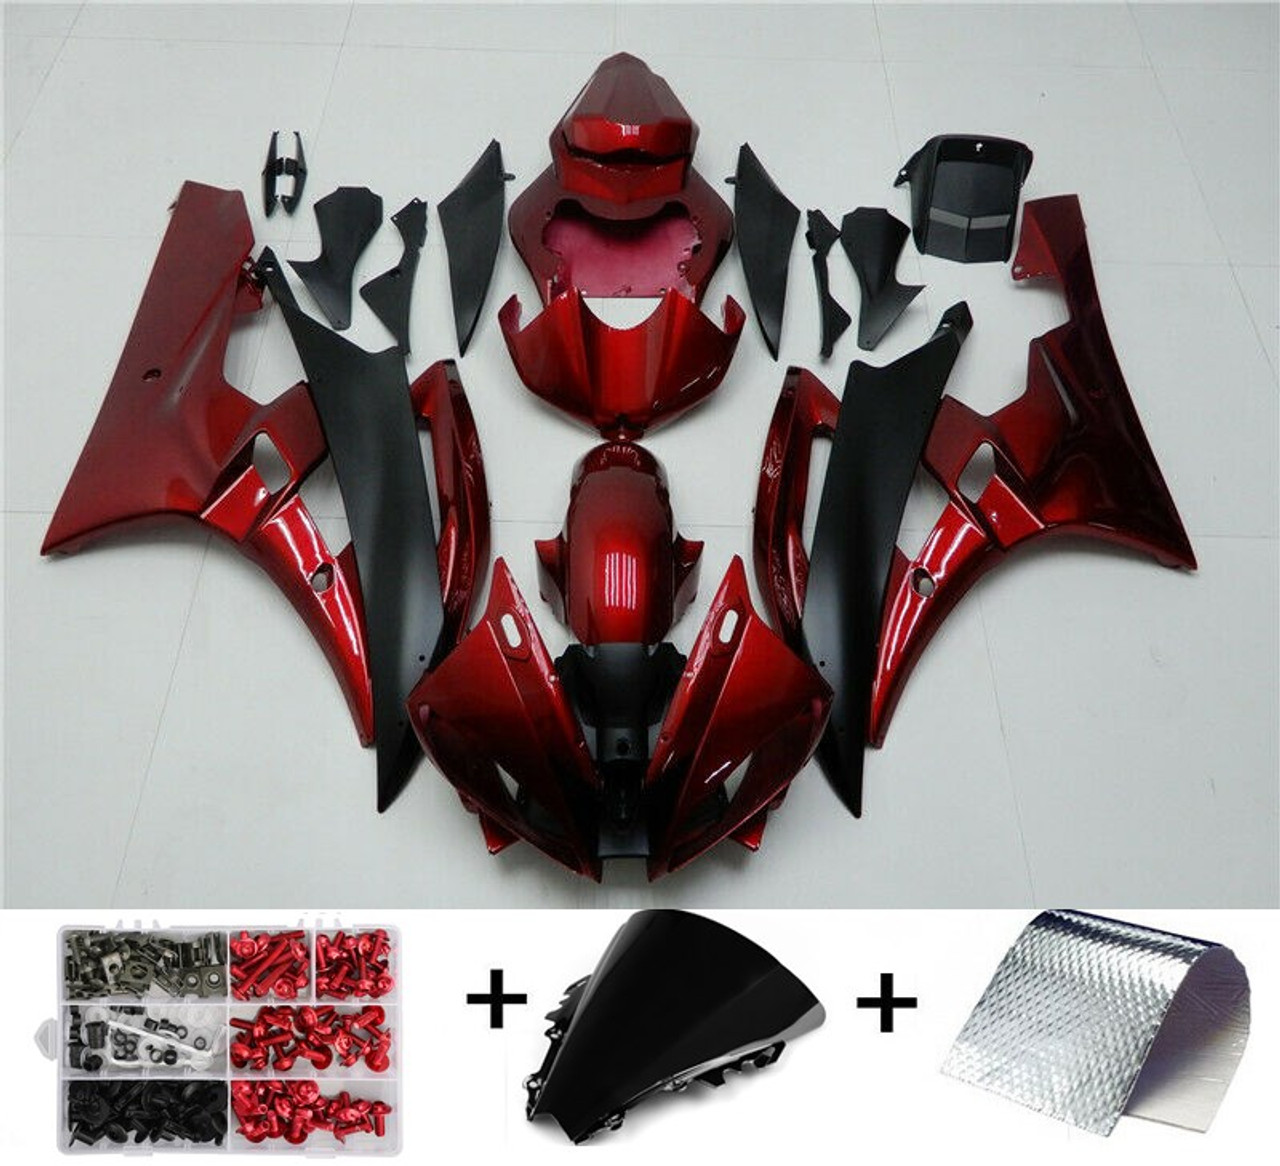 New Red Black Injection Plastic Kit Fairing Fit for Yamaha 2006 2007 YZF R6